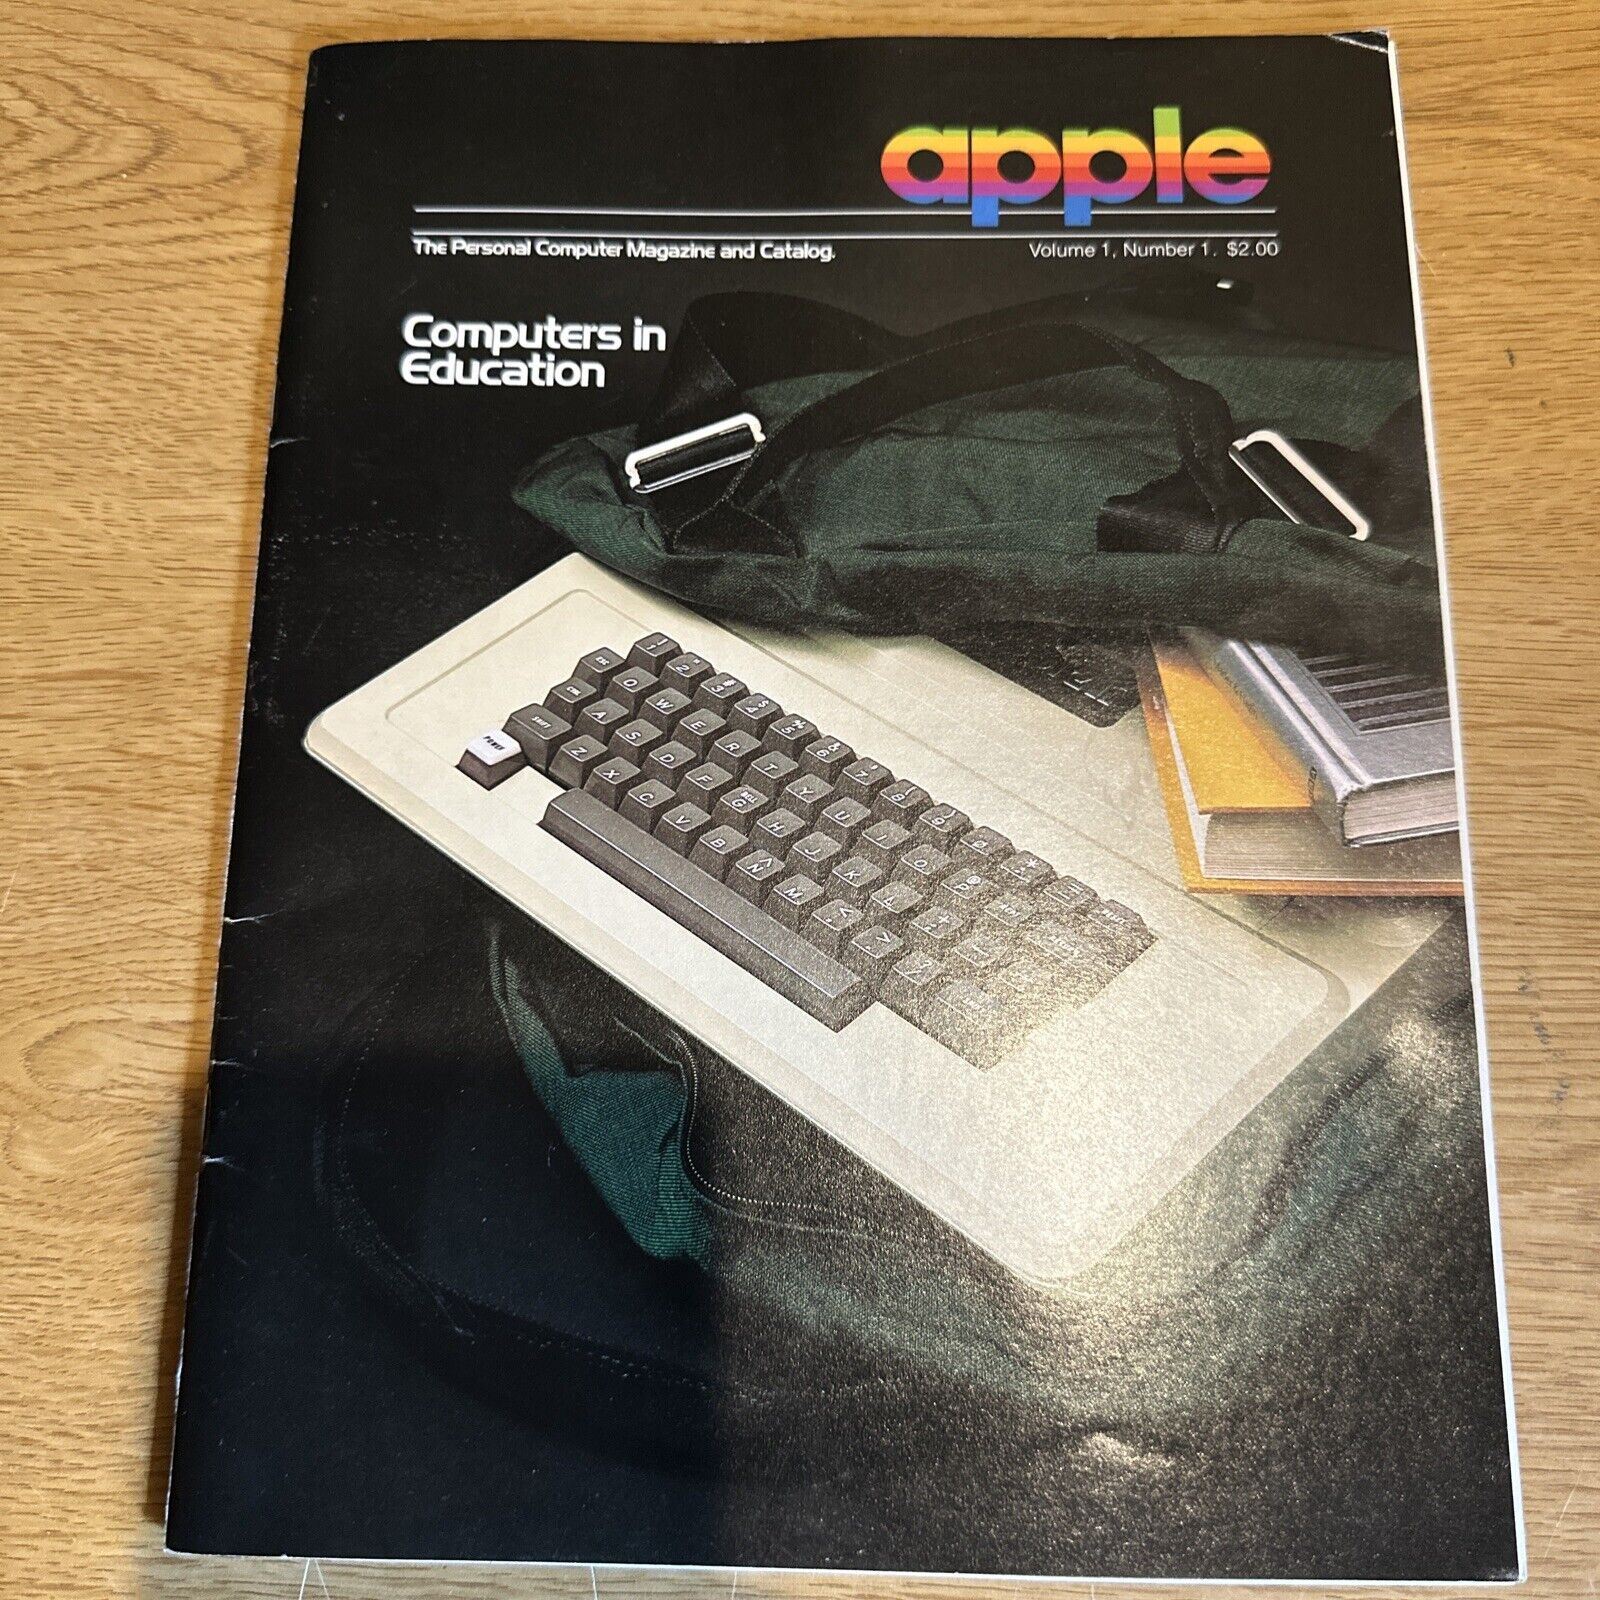 Rare Apple The Personal Computer Magazine Volume 1, Number 1